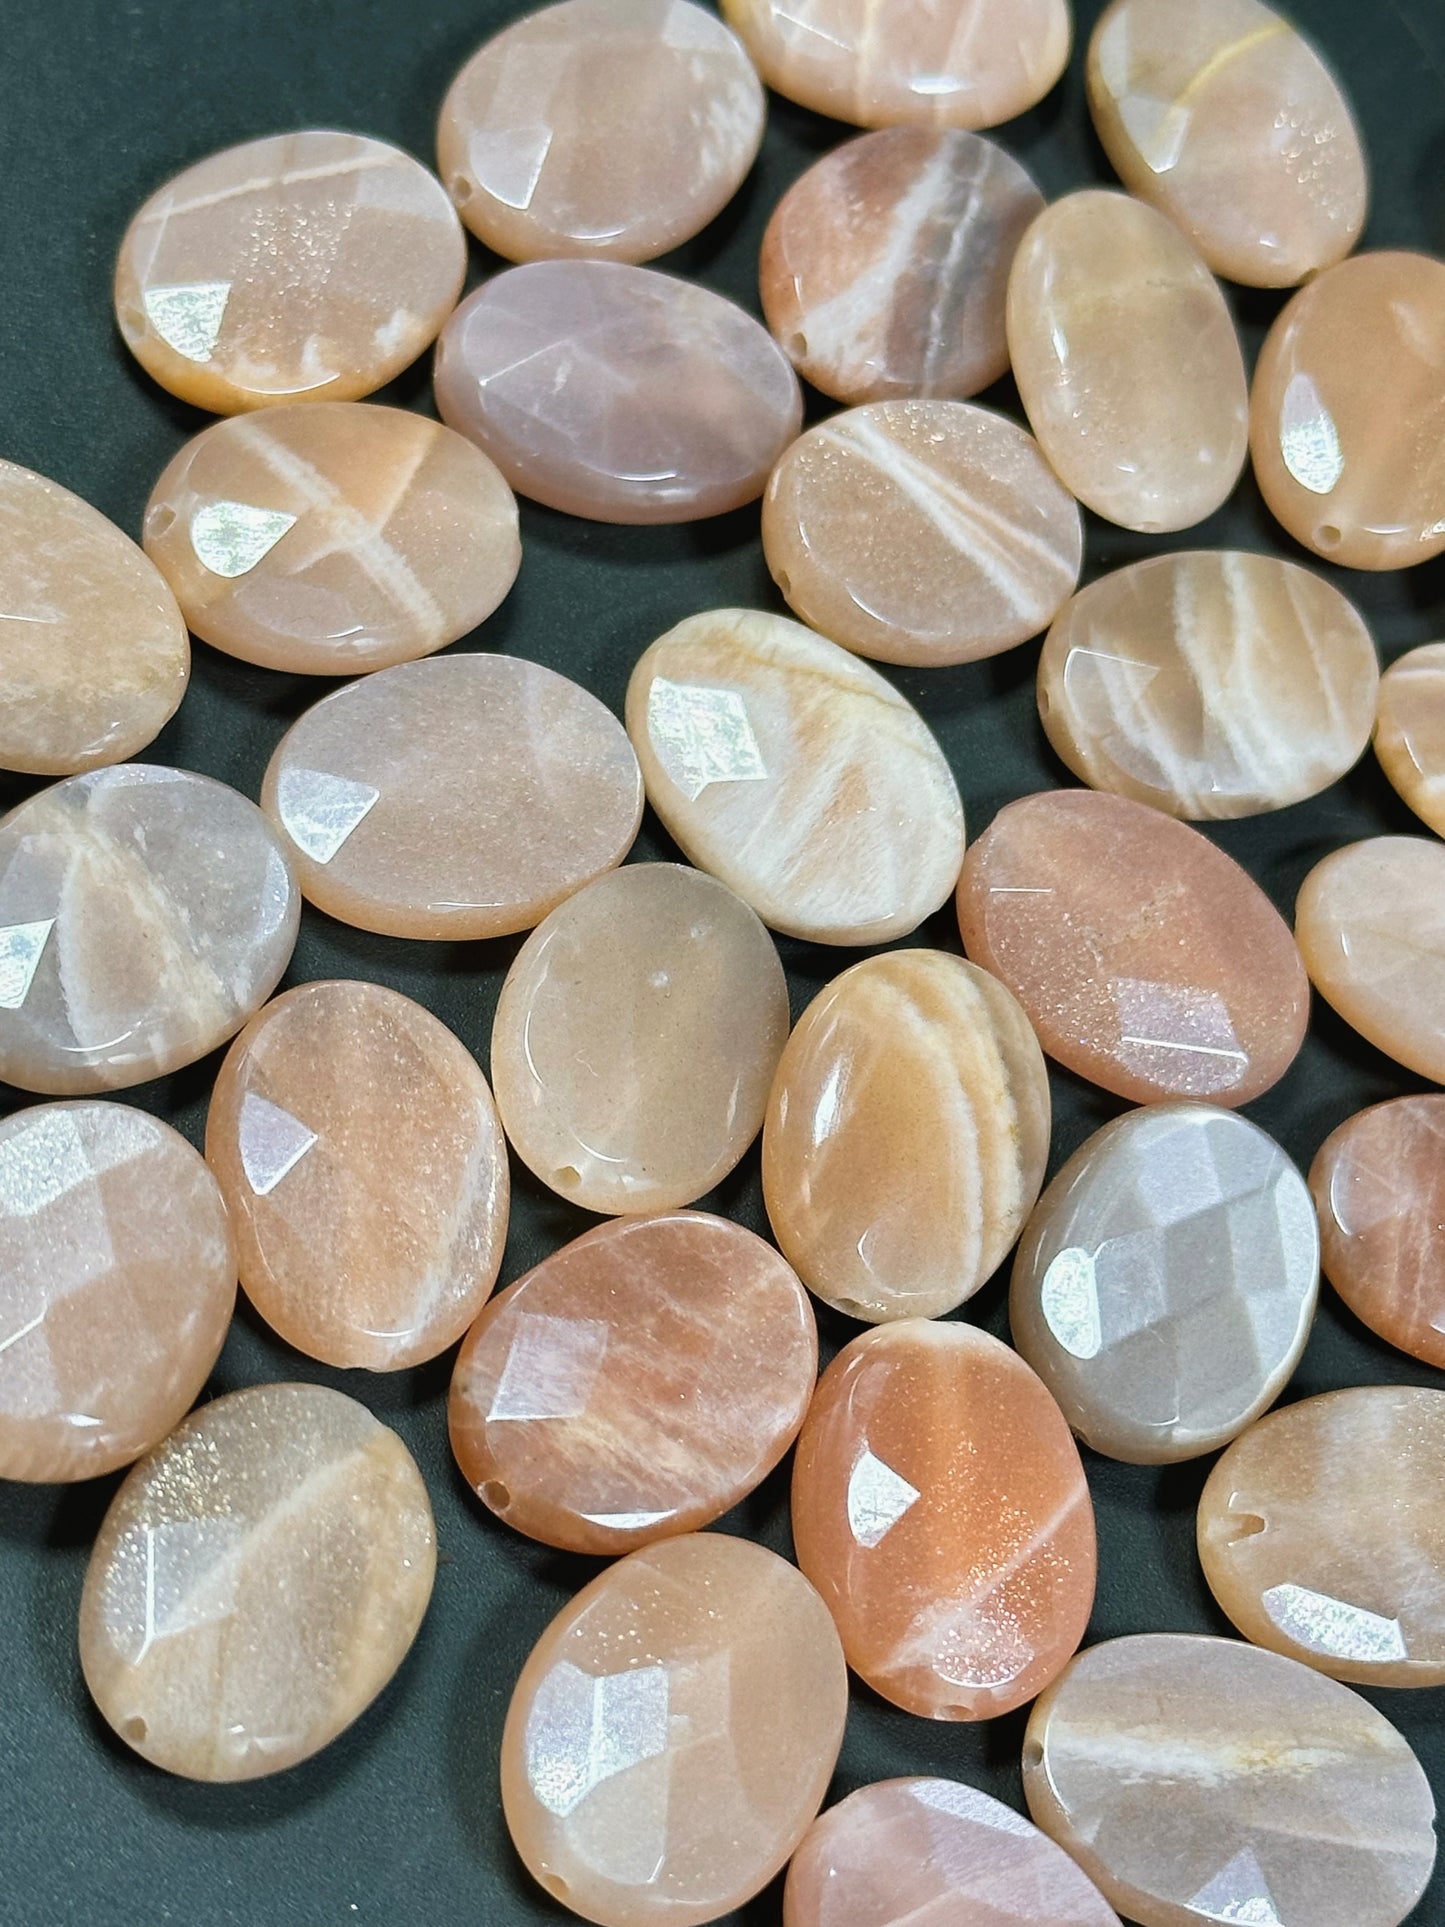 AAA Natural Peach Brown Moonstone Gemstone Bead Faceted 20x15mm Oval Shape, Gorgeous Peach Brown Color Shimmer Moonstone Bead, LOOSE BEADS